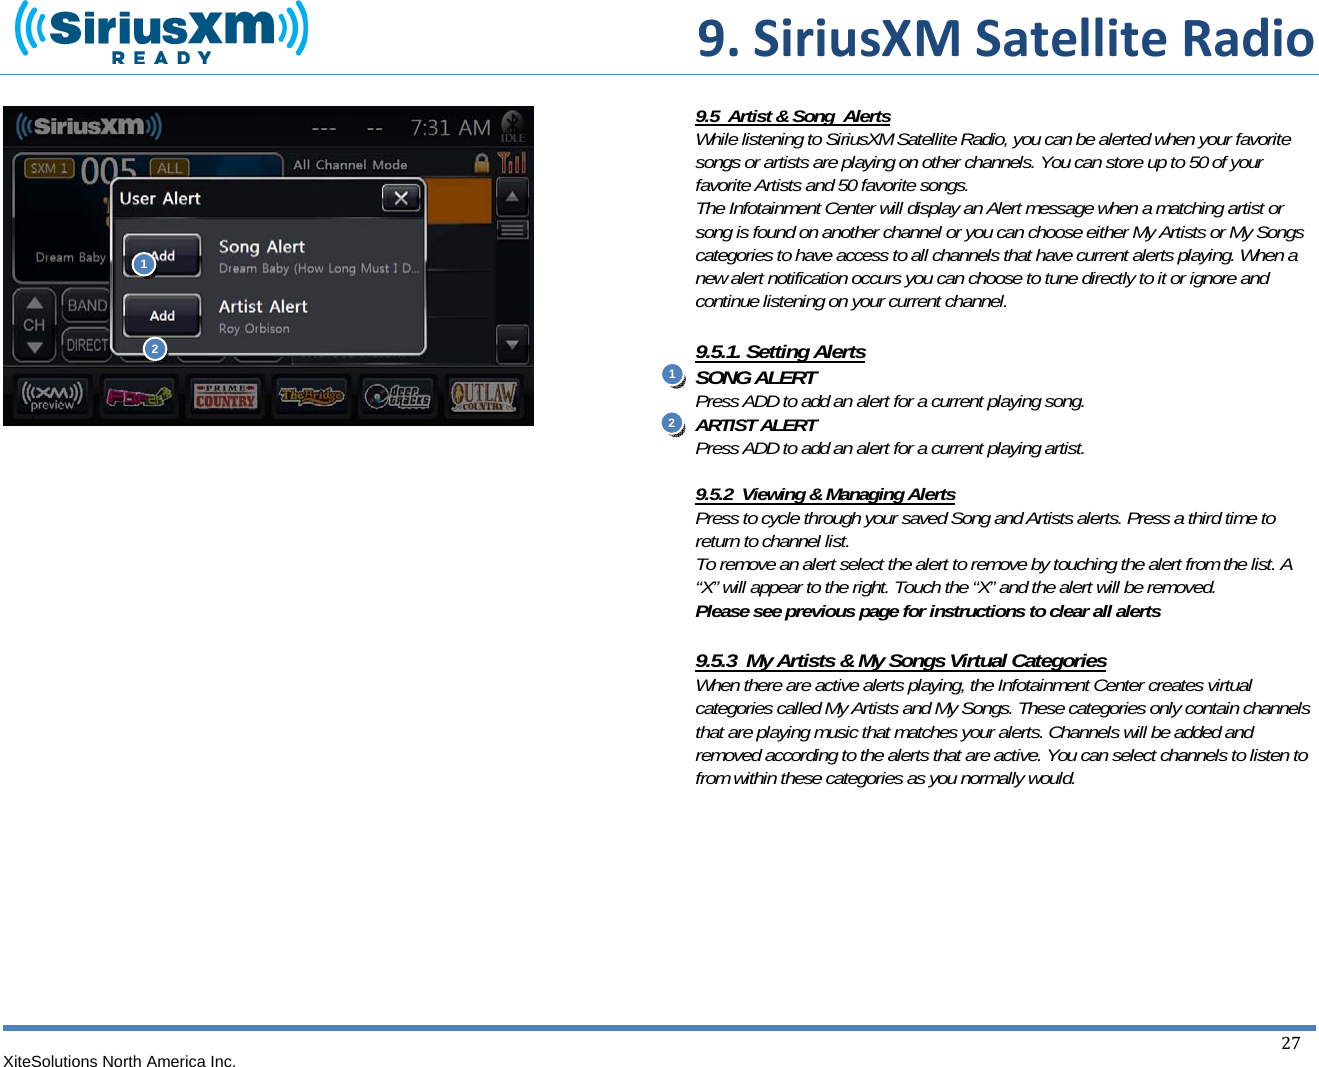  9.SiriusXMSatelliteRadioXiteSolutions North America Inc.  27                                 9.5  Artist &amp; Song  Alerts While listening to SiriusXM Satellite Radio, you can be alerted when your favorite songs or artists are playing on other channels. You can store up to 50 of your favorite Artists and 50 favorite songs. The Infotainment Center will display an Alert message when a matching artist or song is found on another channel or you can choose either My Artists or My Songs categories to have access to all channels that have current alerts playing. When a new alert notification occurs you can choose to tune directly to it or ignore and continue listening on your current channel.  9.5.1. Setting Alerts SONG ALERT Press ADD to add an alert for a current playing song. ARTIST ALERT Press ADD to add an alert for a current playing artist.    9.5.2  Viewing &amp; Managing Alerts Press to cycle through your saved Song and Artists alerts. Press a third time to return to channel list. To remove an alert select the alert to remove by touching the alert from the list. A “X” will appear to the right. Touch the “X” and the alert will be removed. Please see previous page for instructions to clear all alerts  9.5.3  My Artists &amp; My Songs Virtual Categories When there are active alerts playing, the Infotainment Center creates virtual categories called My Artists and My Songs. These categories only contain channels that are playing music that matches your alerts. Channels will be added and removed according to the alerts that are active. You can select channels to listen to from within these categories as you normally would.         112 2